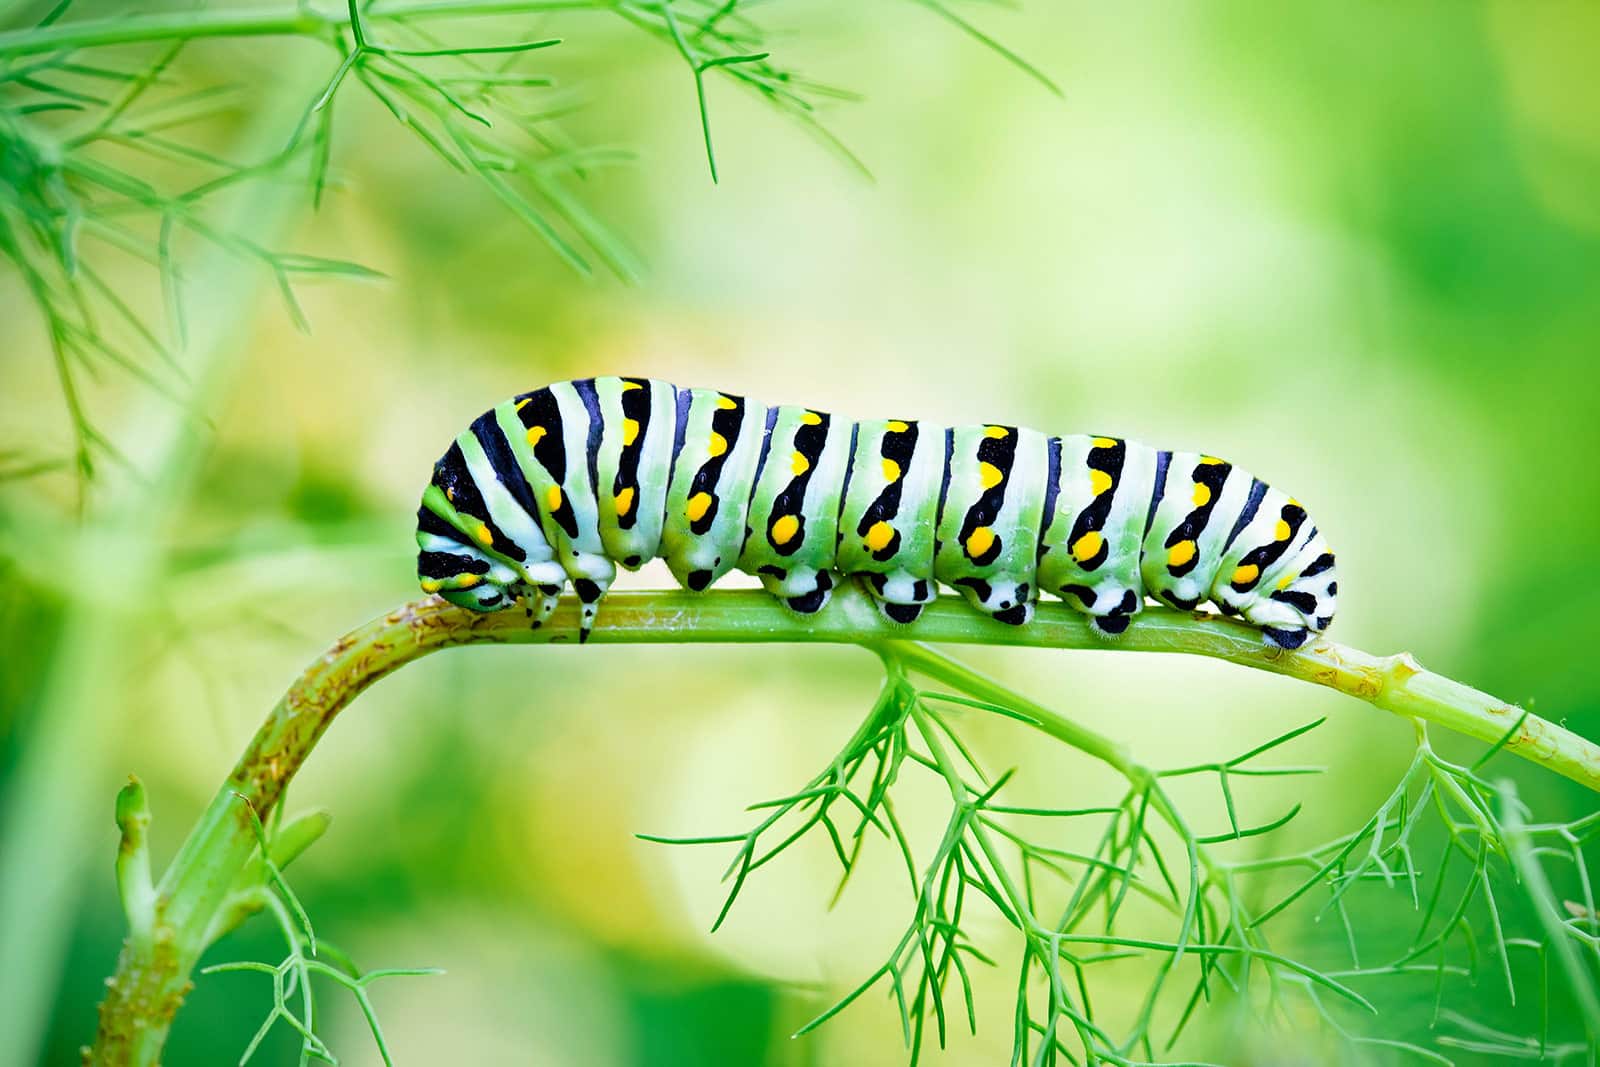 Simple Visual Guide: 17 Types of Striped Caterpillars That May Be